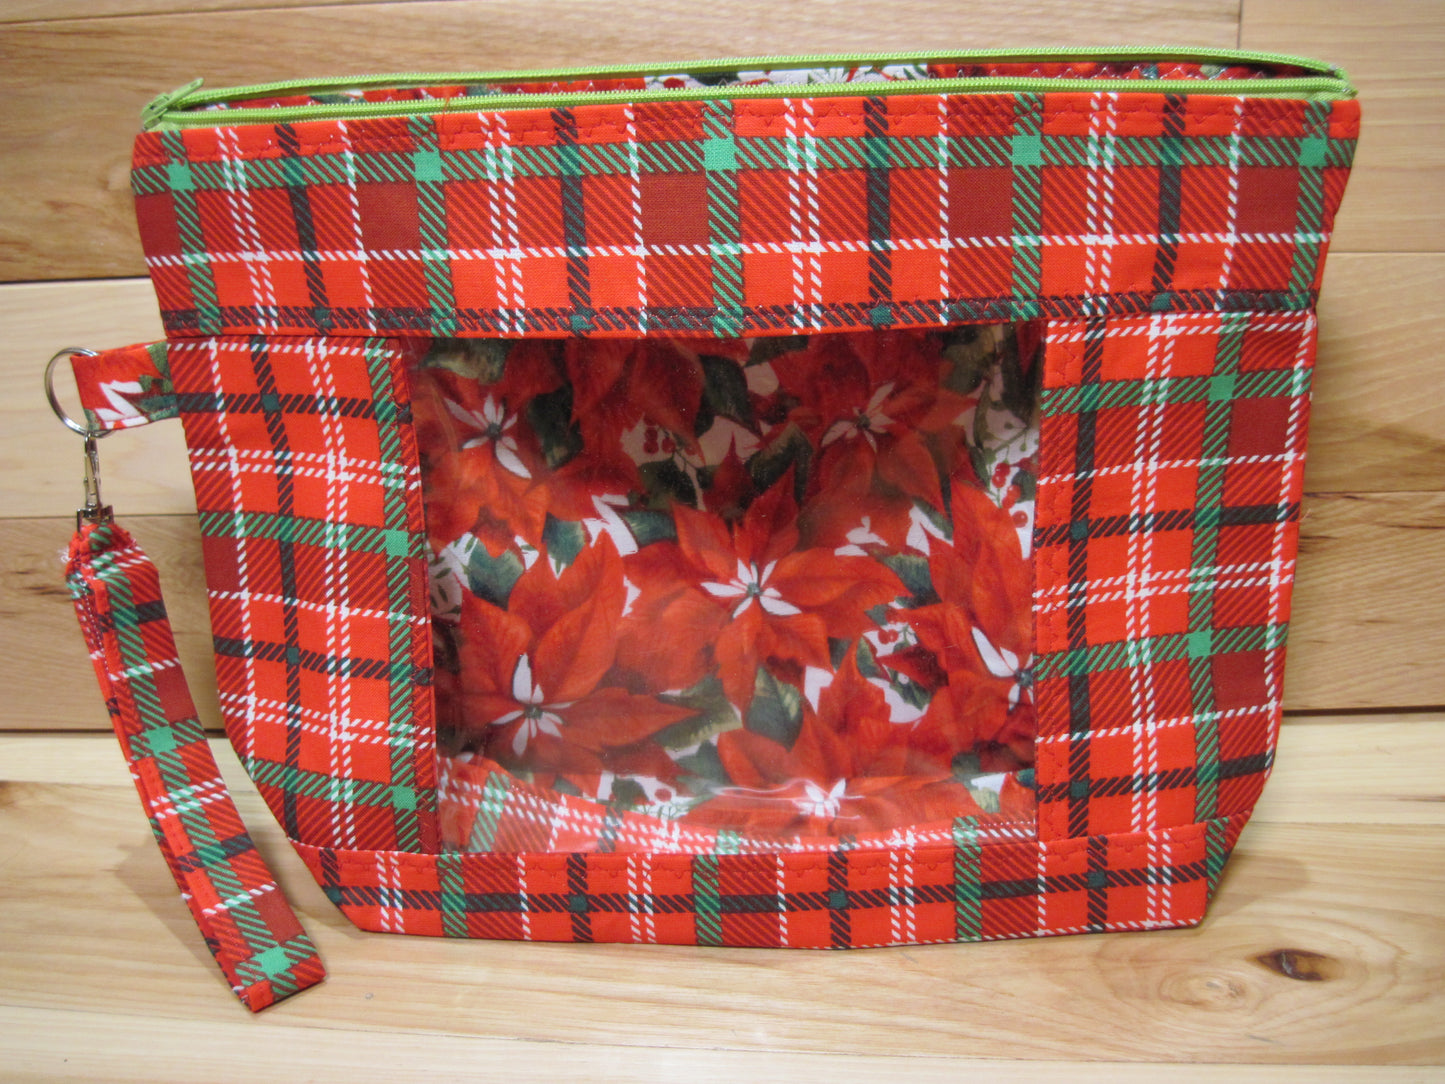 Medium Windows Plaid with Poinsettia project bags